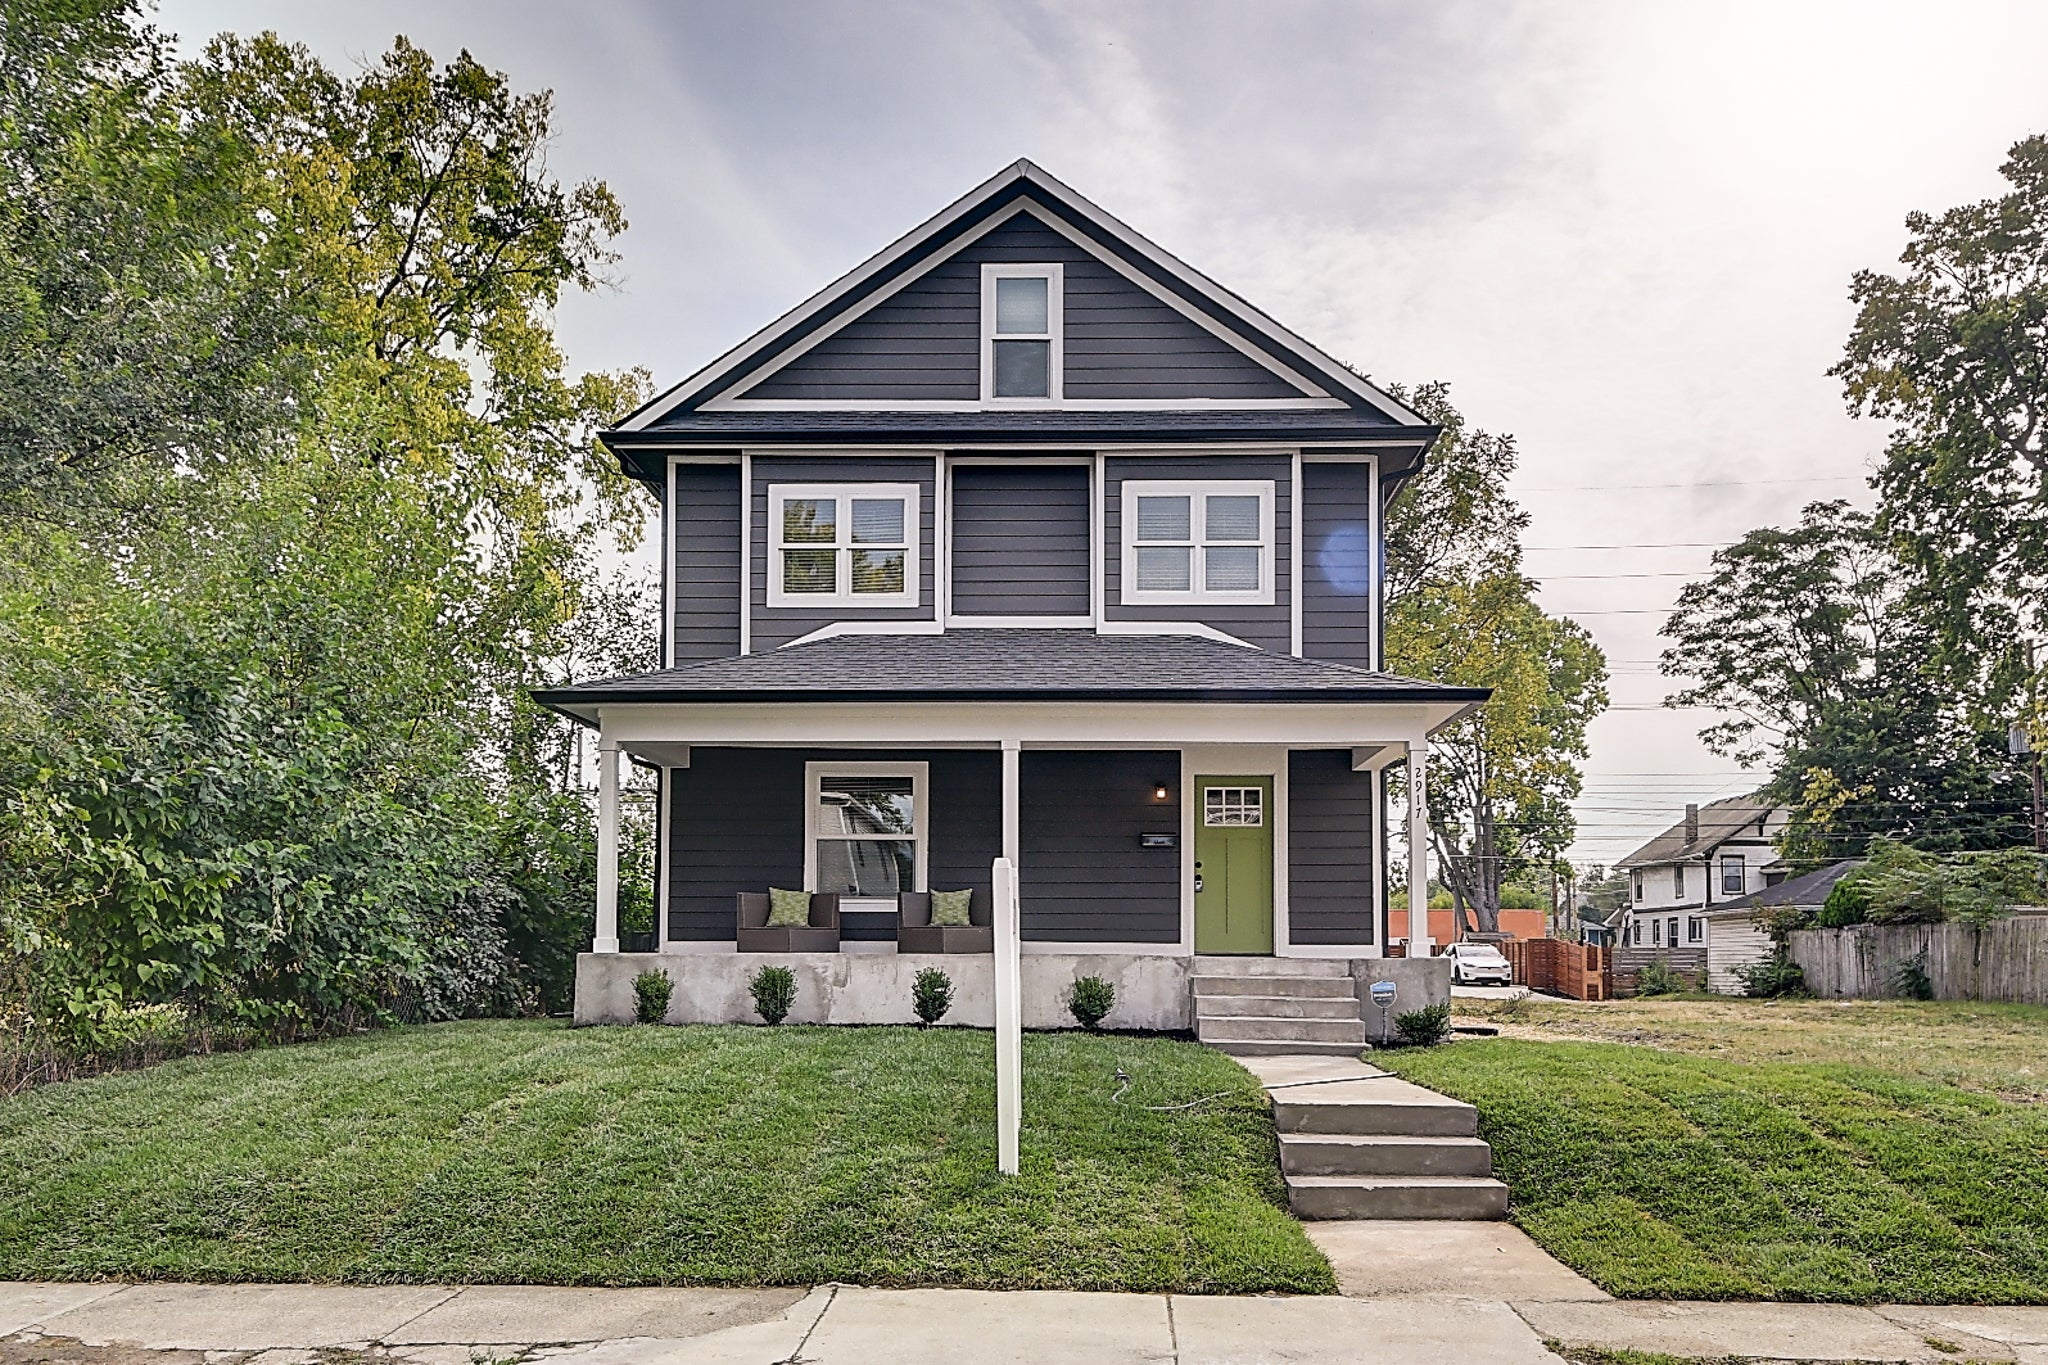 Photo of 2917 N New Jersey Street Indianapolis, IN 46205